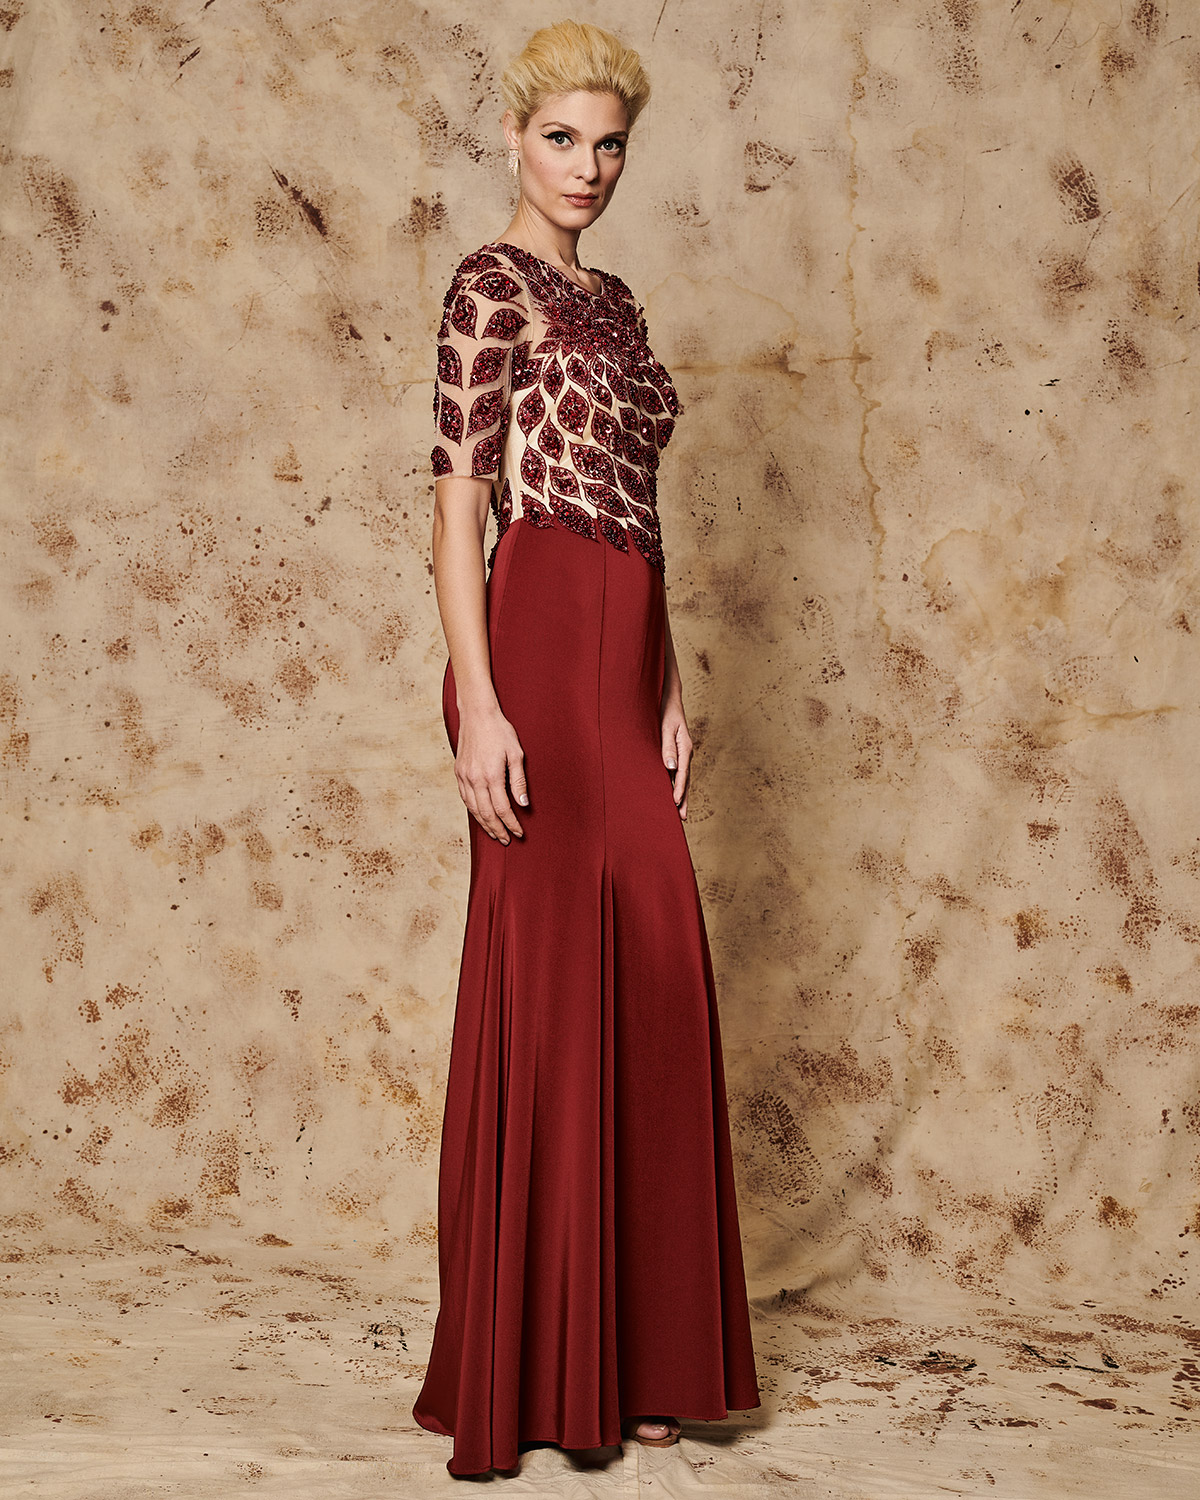 Classic Dresses / Long evening dress with tulle sleeves and beading